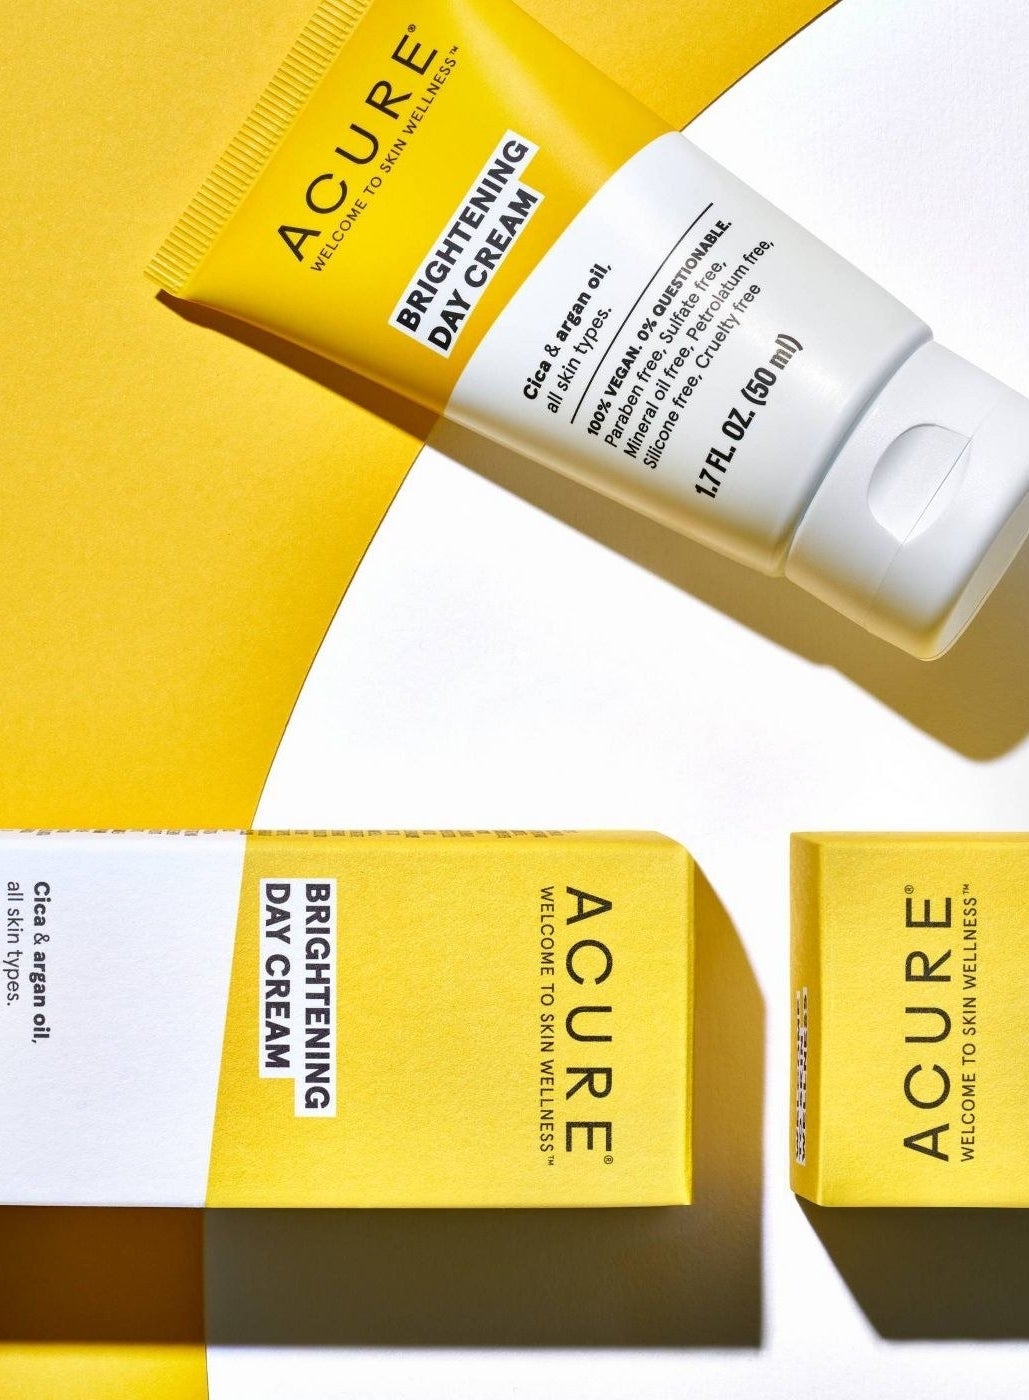 A yellow and white tube of brightening day cream